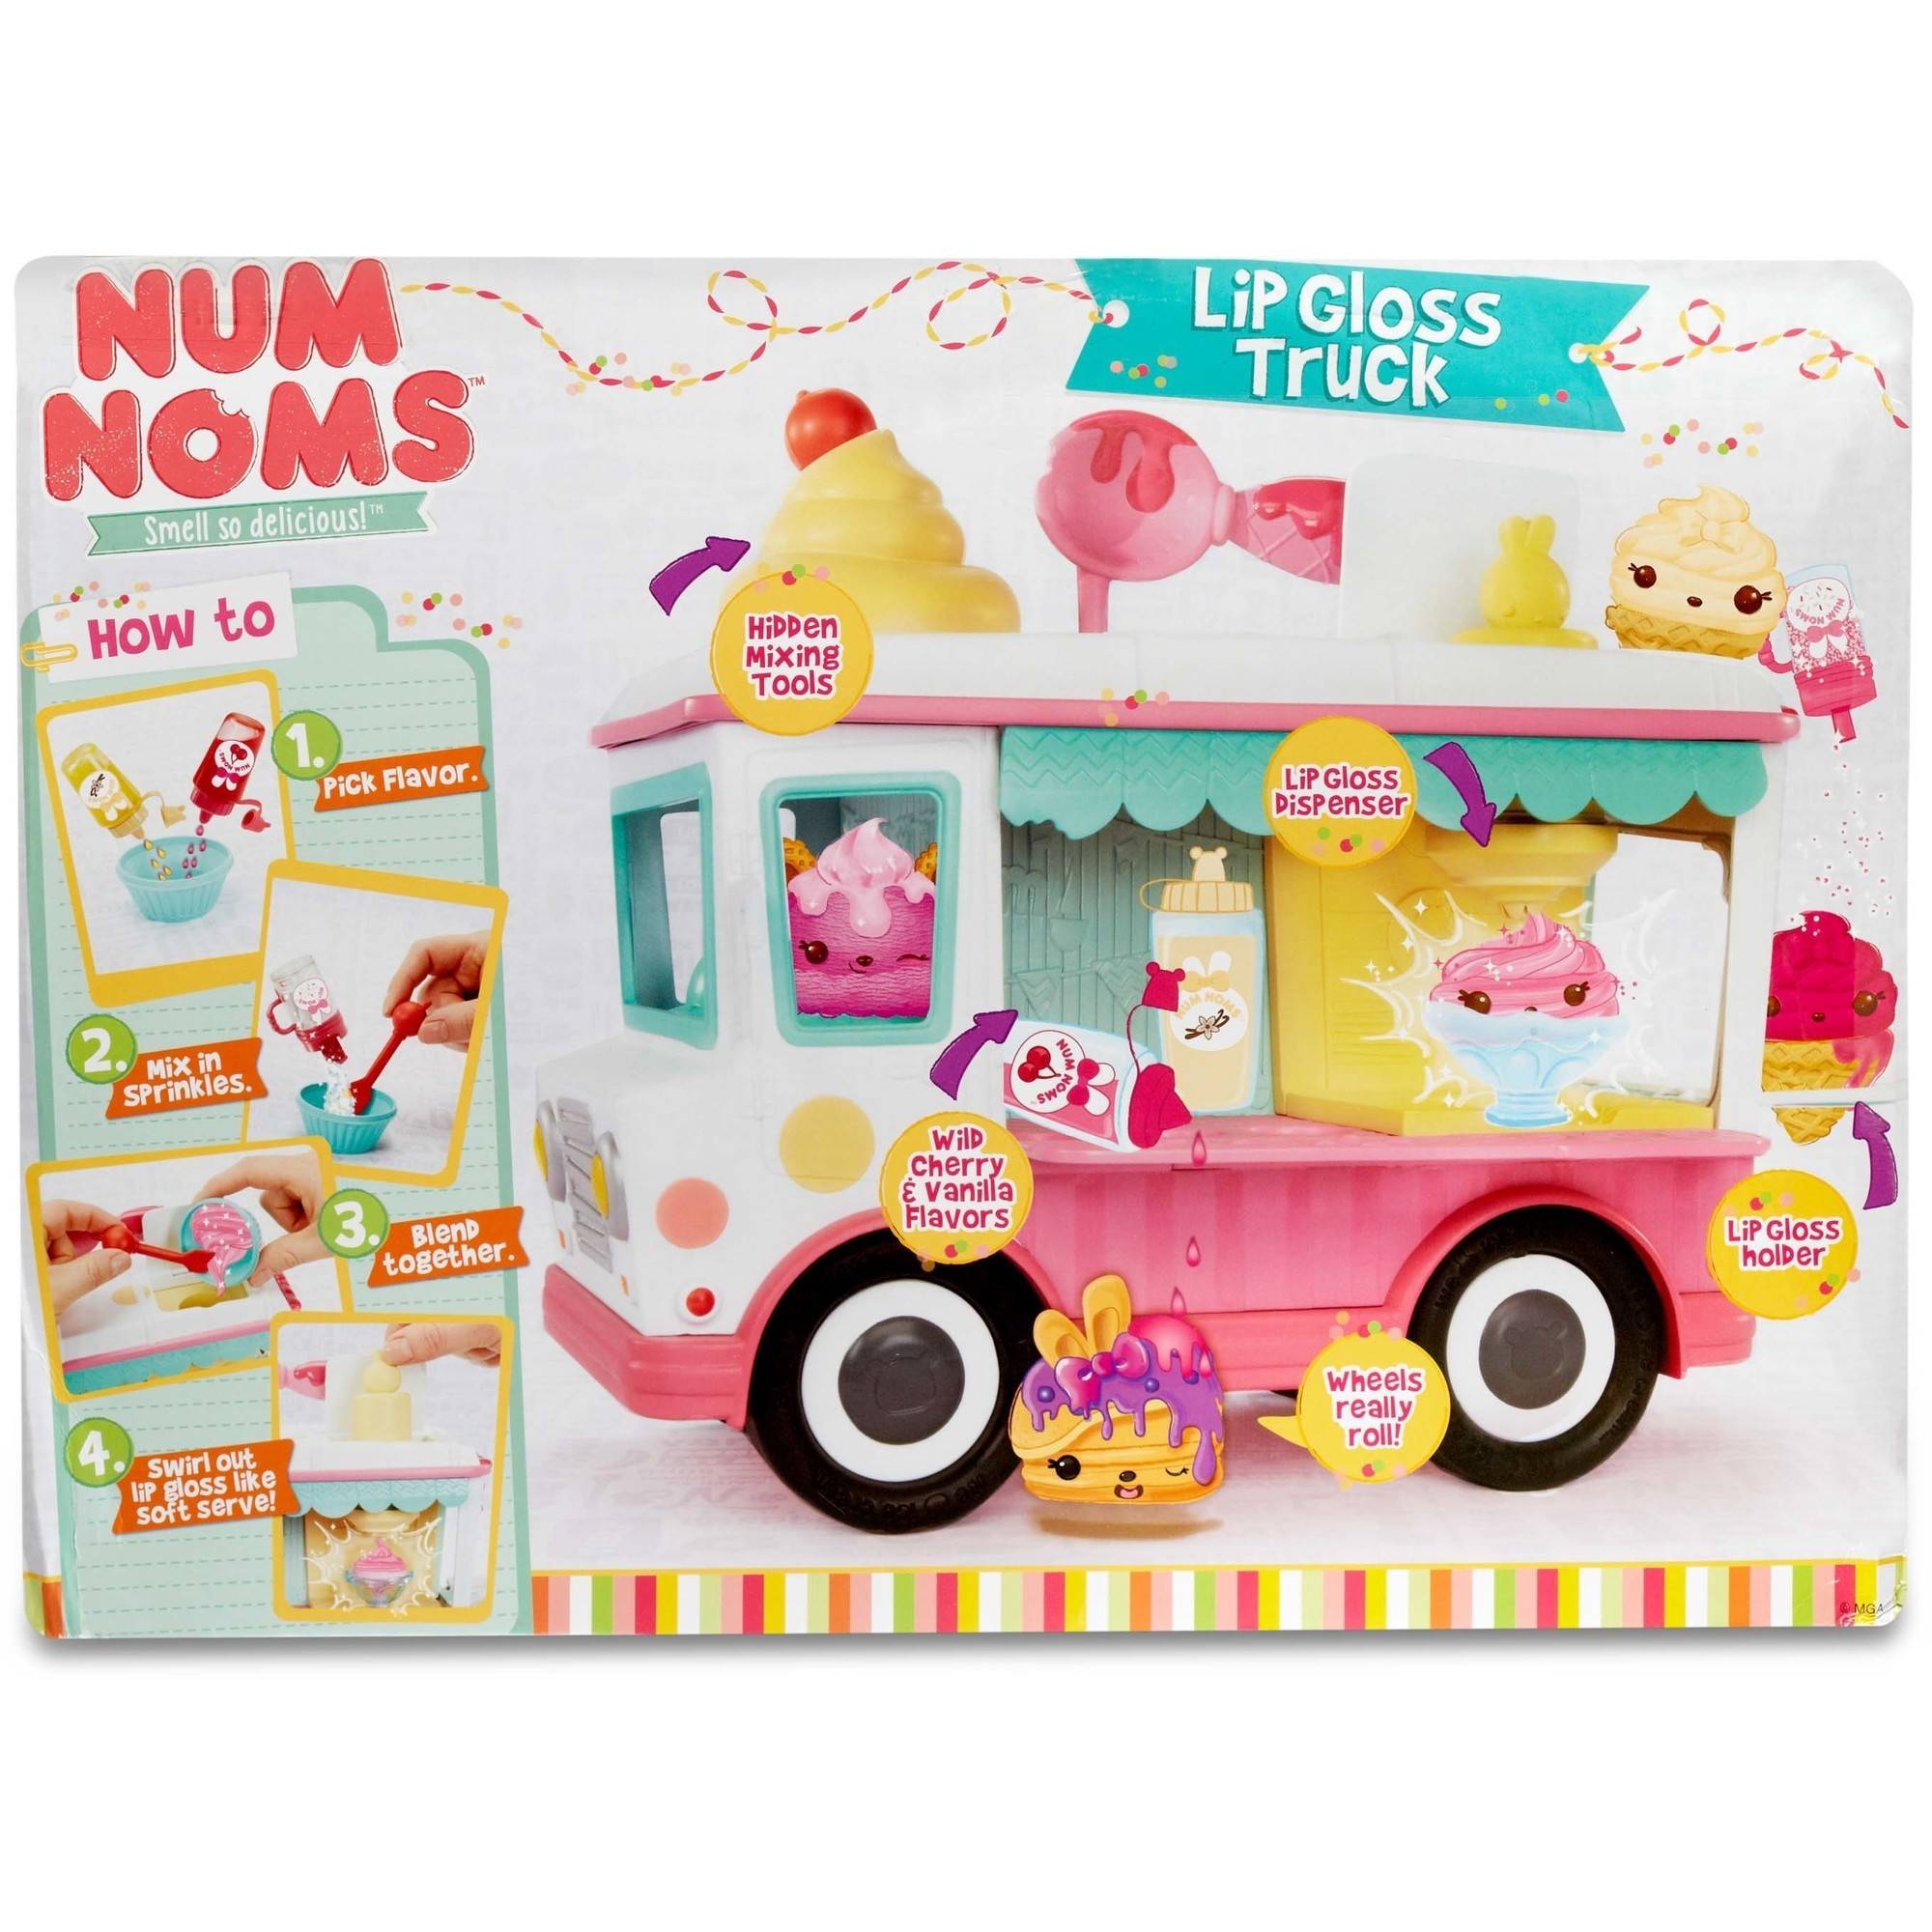 Num Noms Lipgloss Truck Craft Kit - image 4 of 4